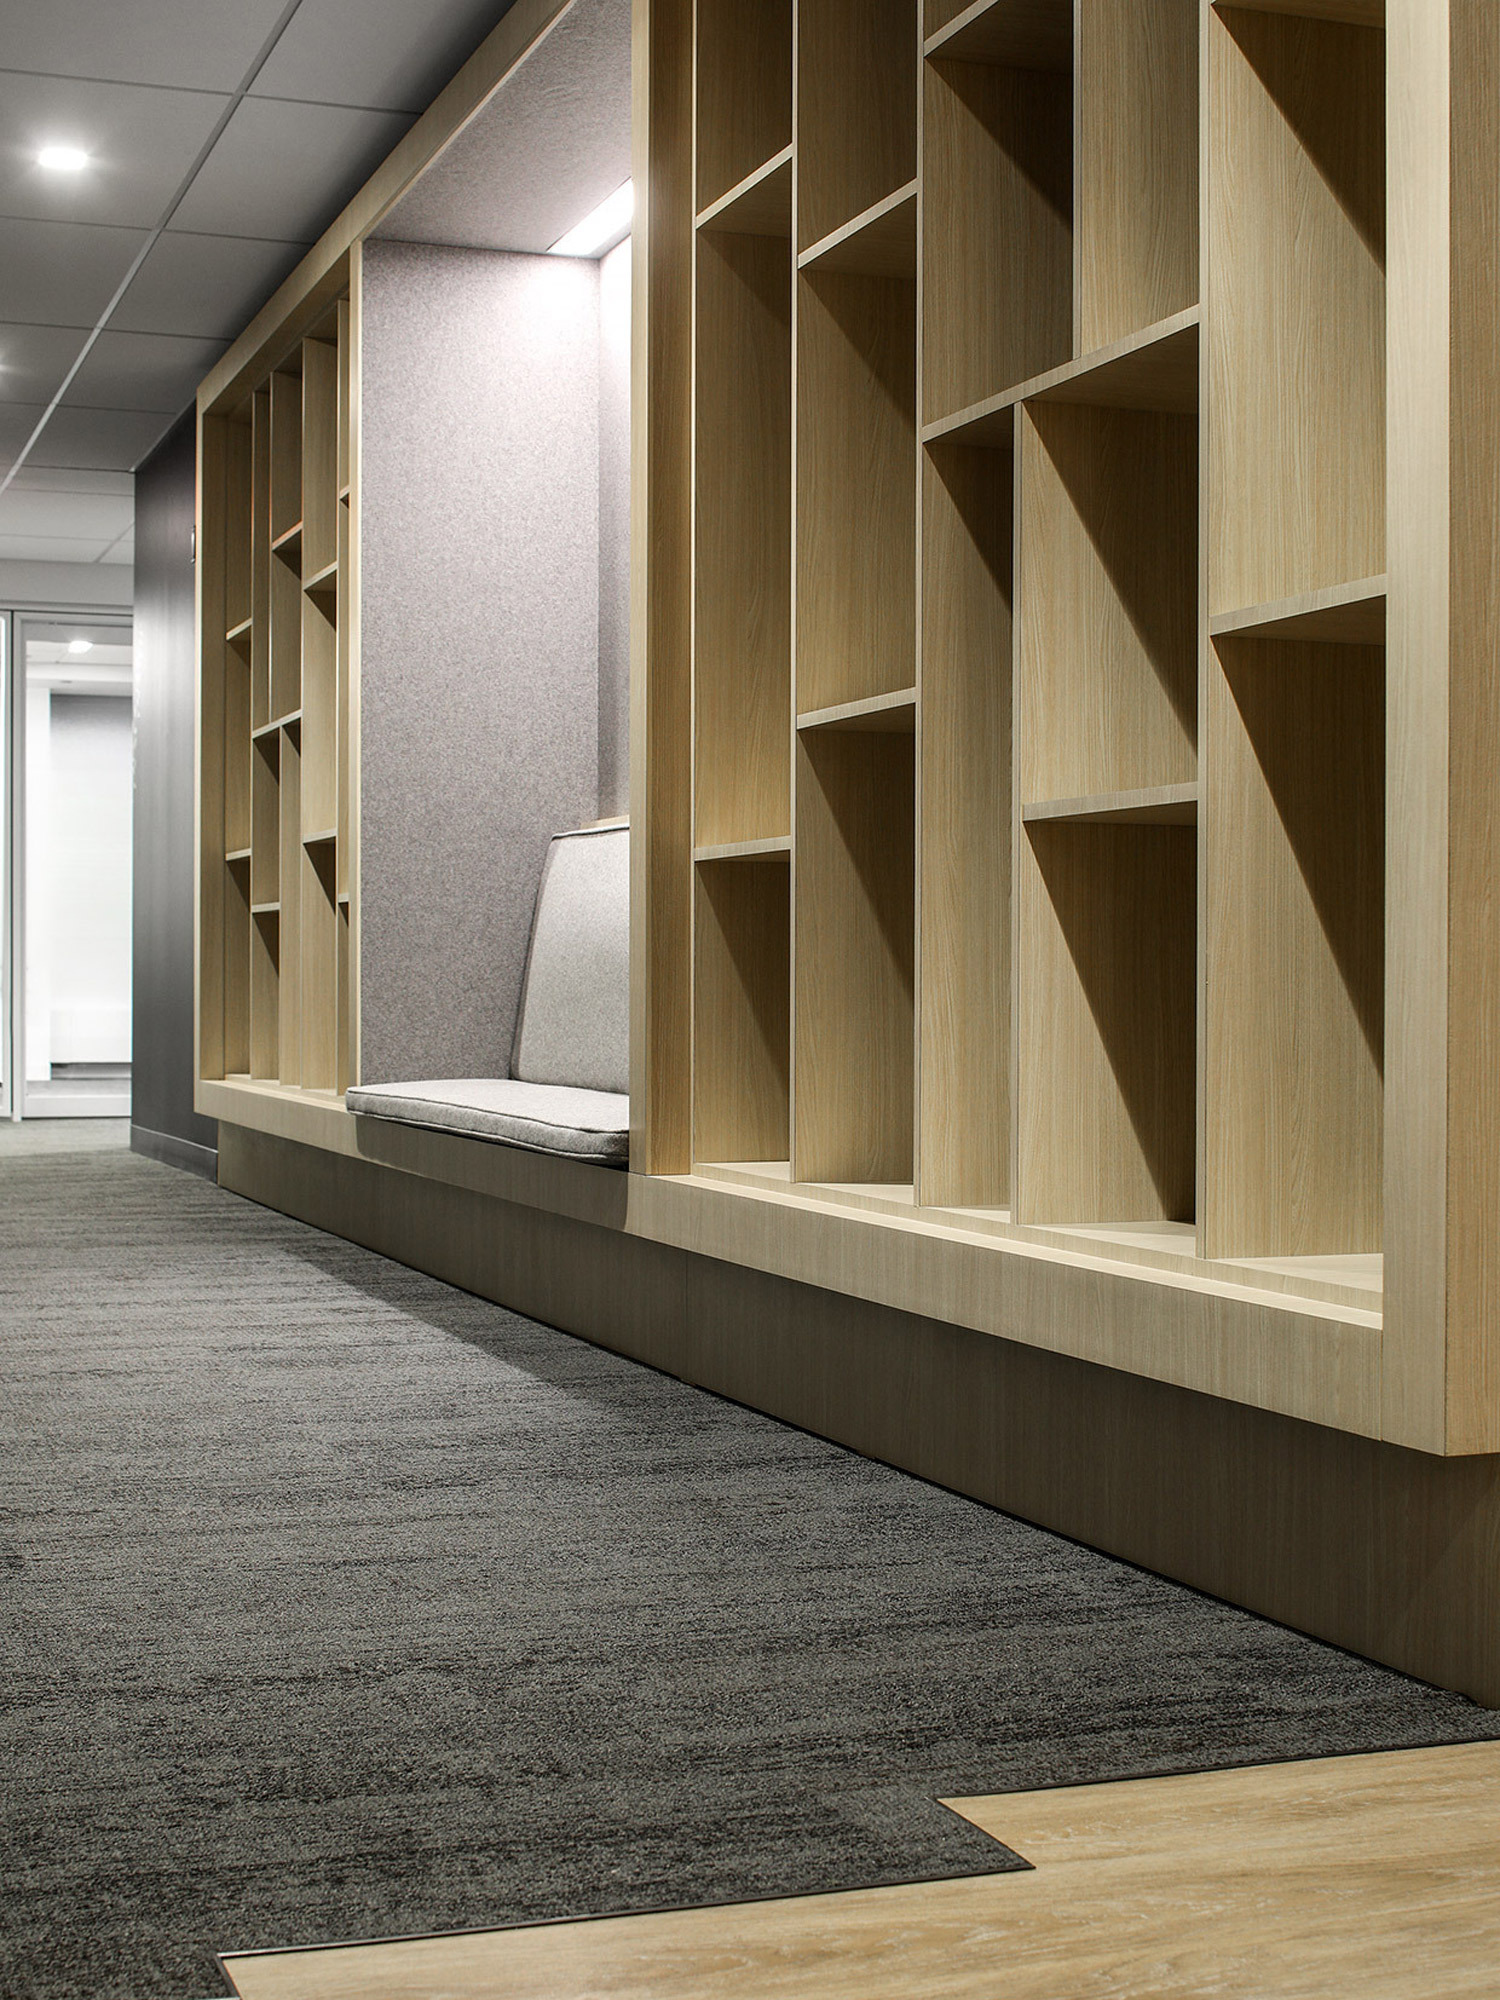 Custom-designed, floor-to-ceiling wooden bookshelves with asymmetrical shelving patterns flank a built-in seating nook, upholstered in light gray. Textured gray carpet flooring transitions to natural wood, highlighting streamlined, modern aesthetics in a corporate office setting.